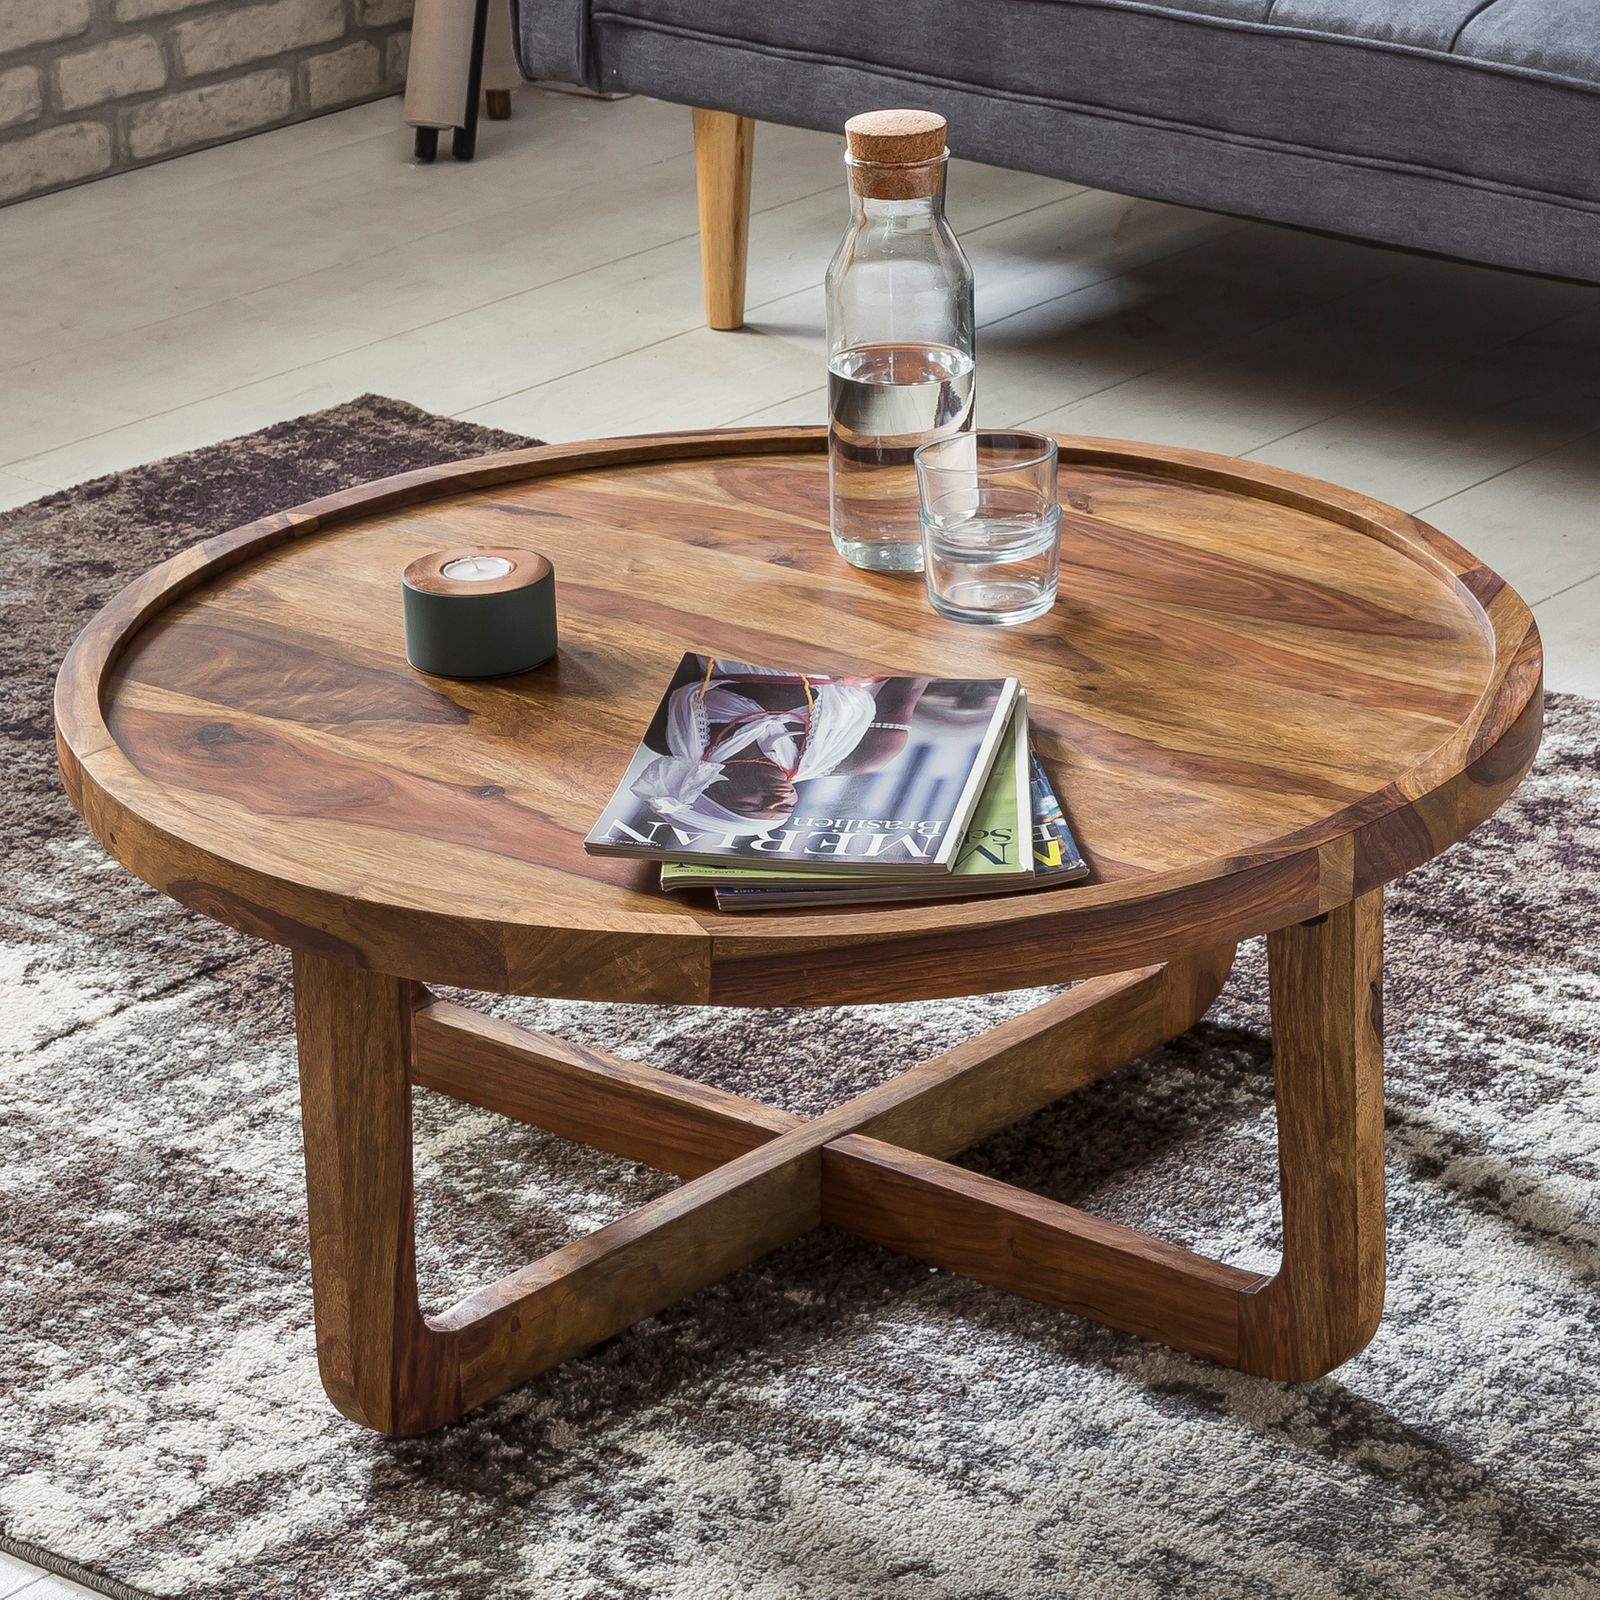 Solid Wood Round Coffee Table Uk – Solid Cedar Round Coffee Table For For Coffee Tables With Round Wooden Tops (View 16 of 20)